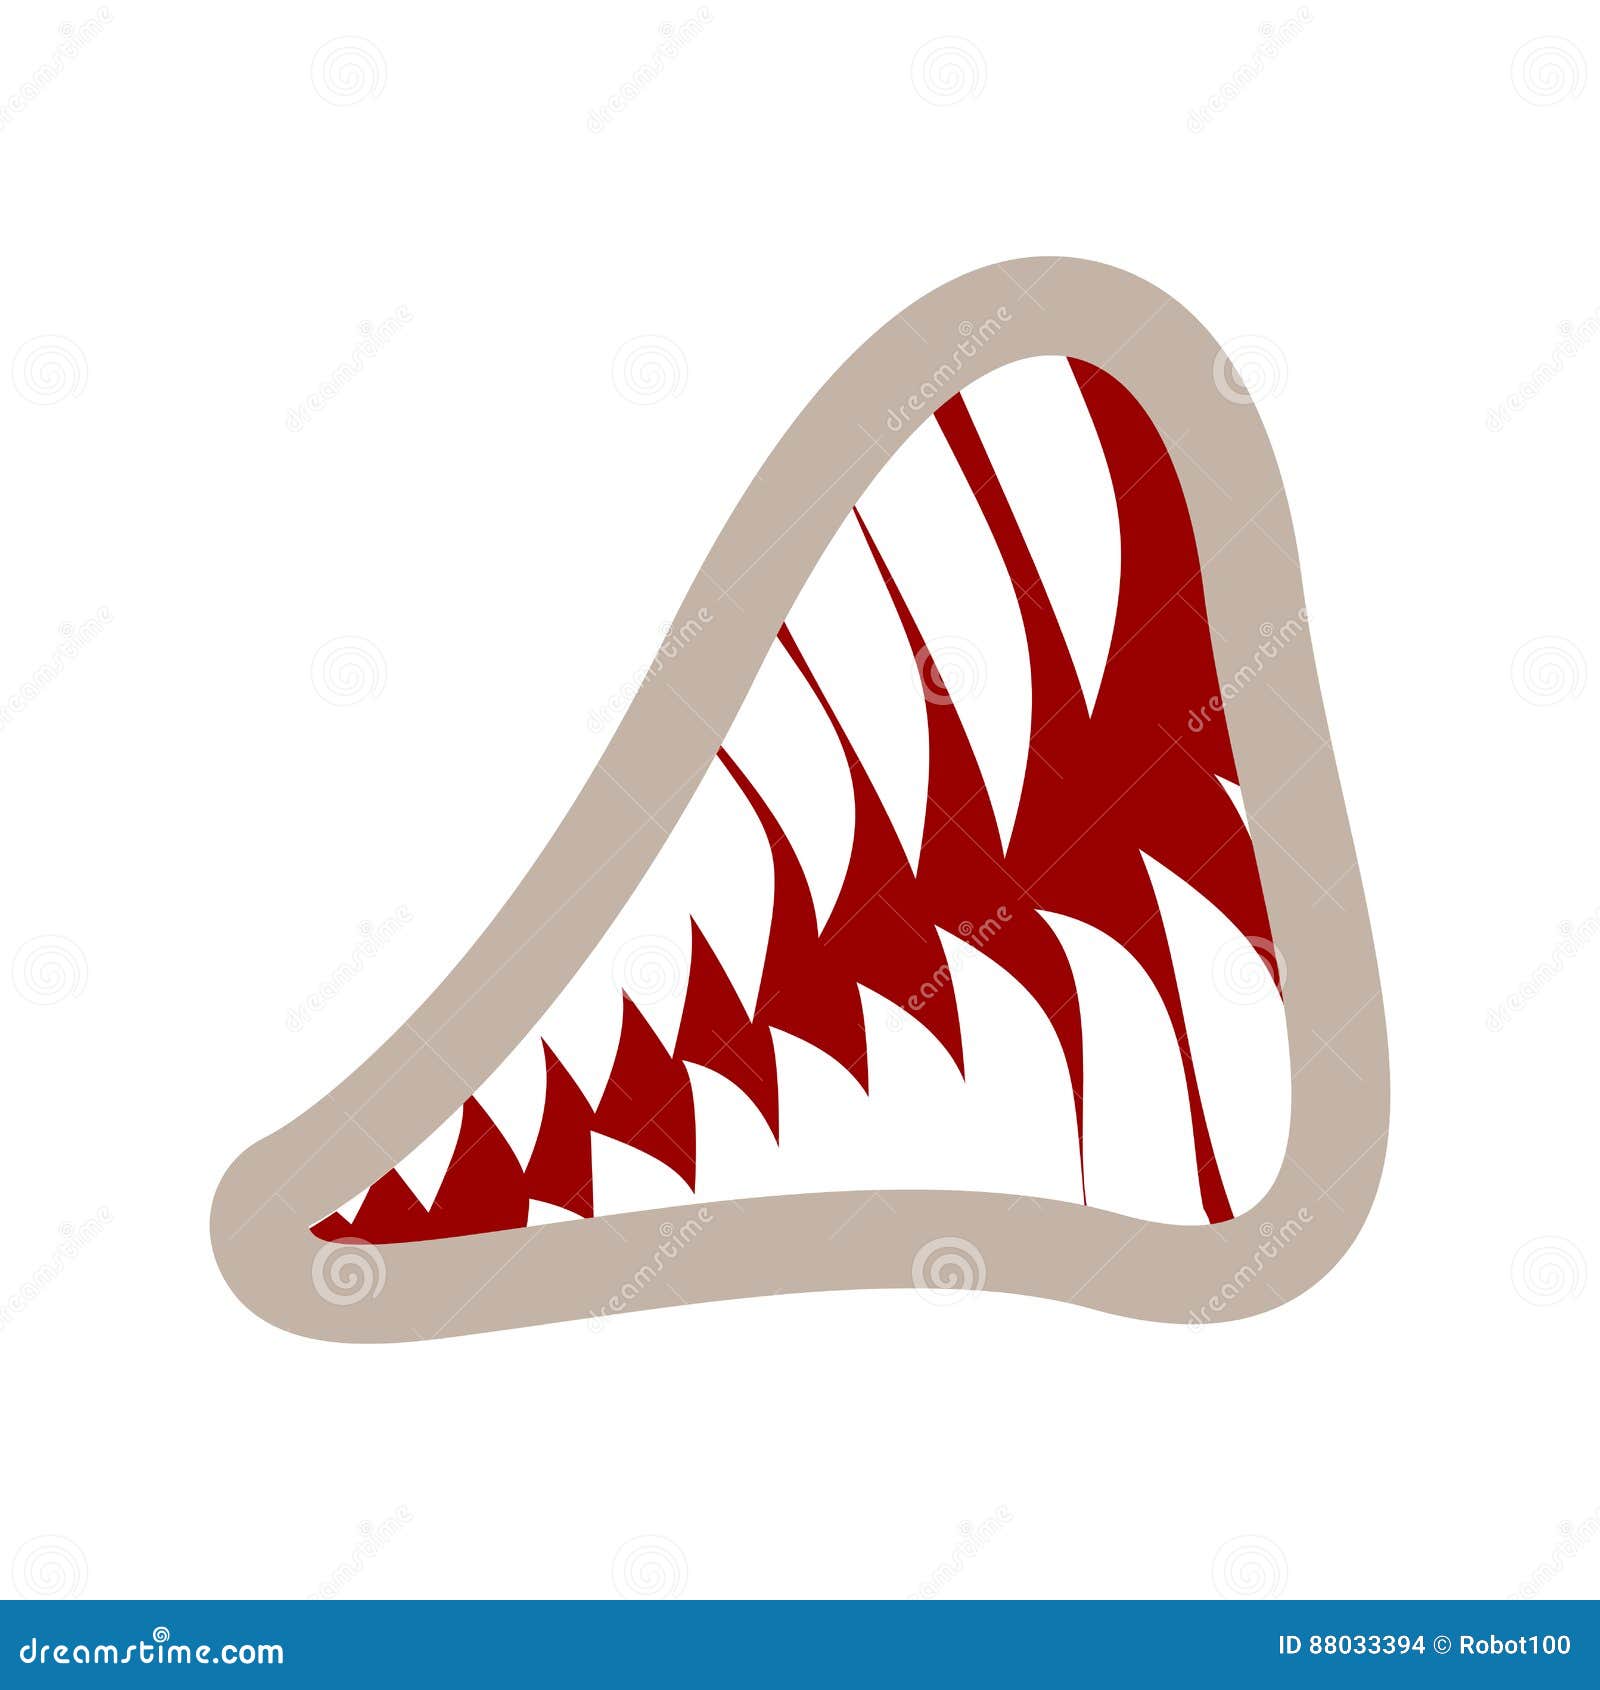 mouth and teeth growl . animal jaws on white background